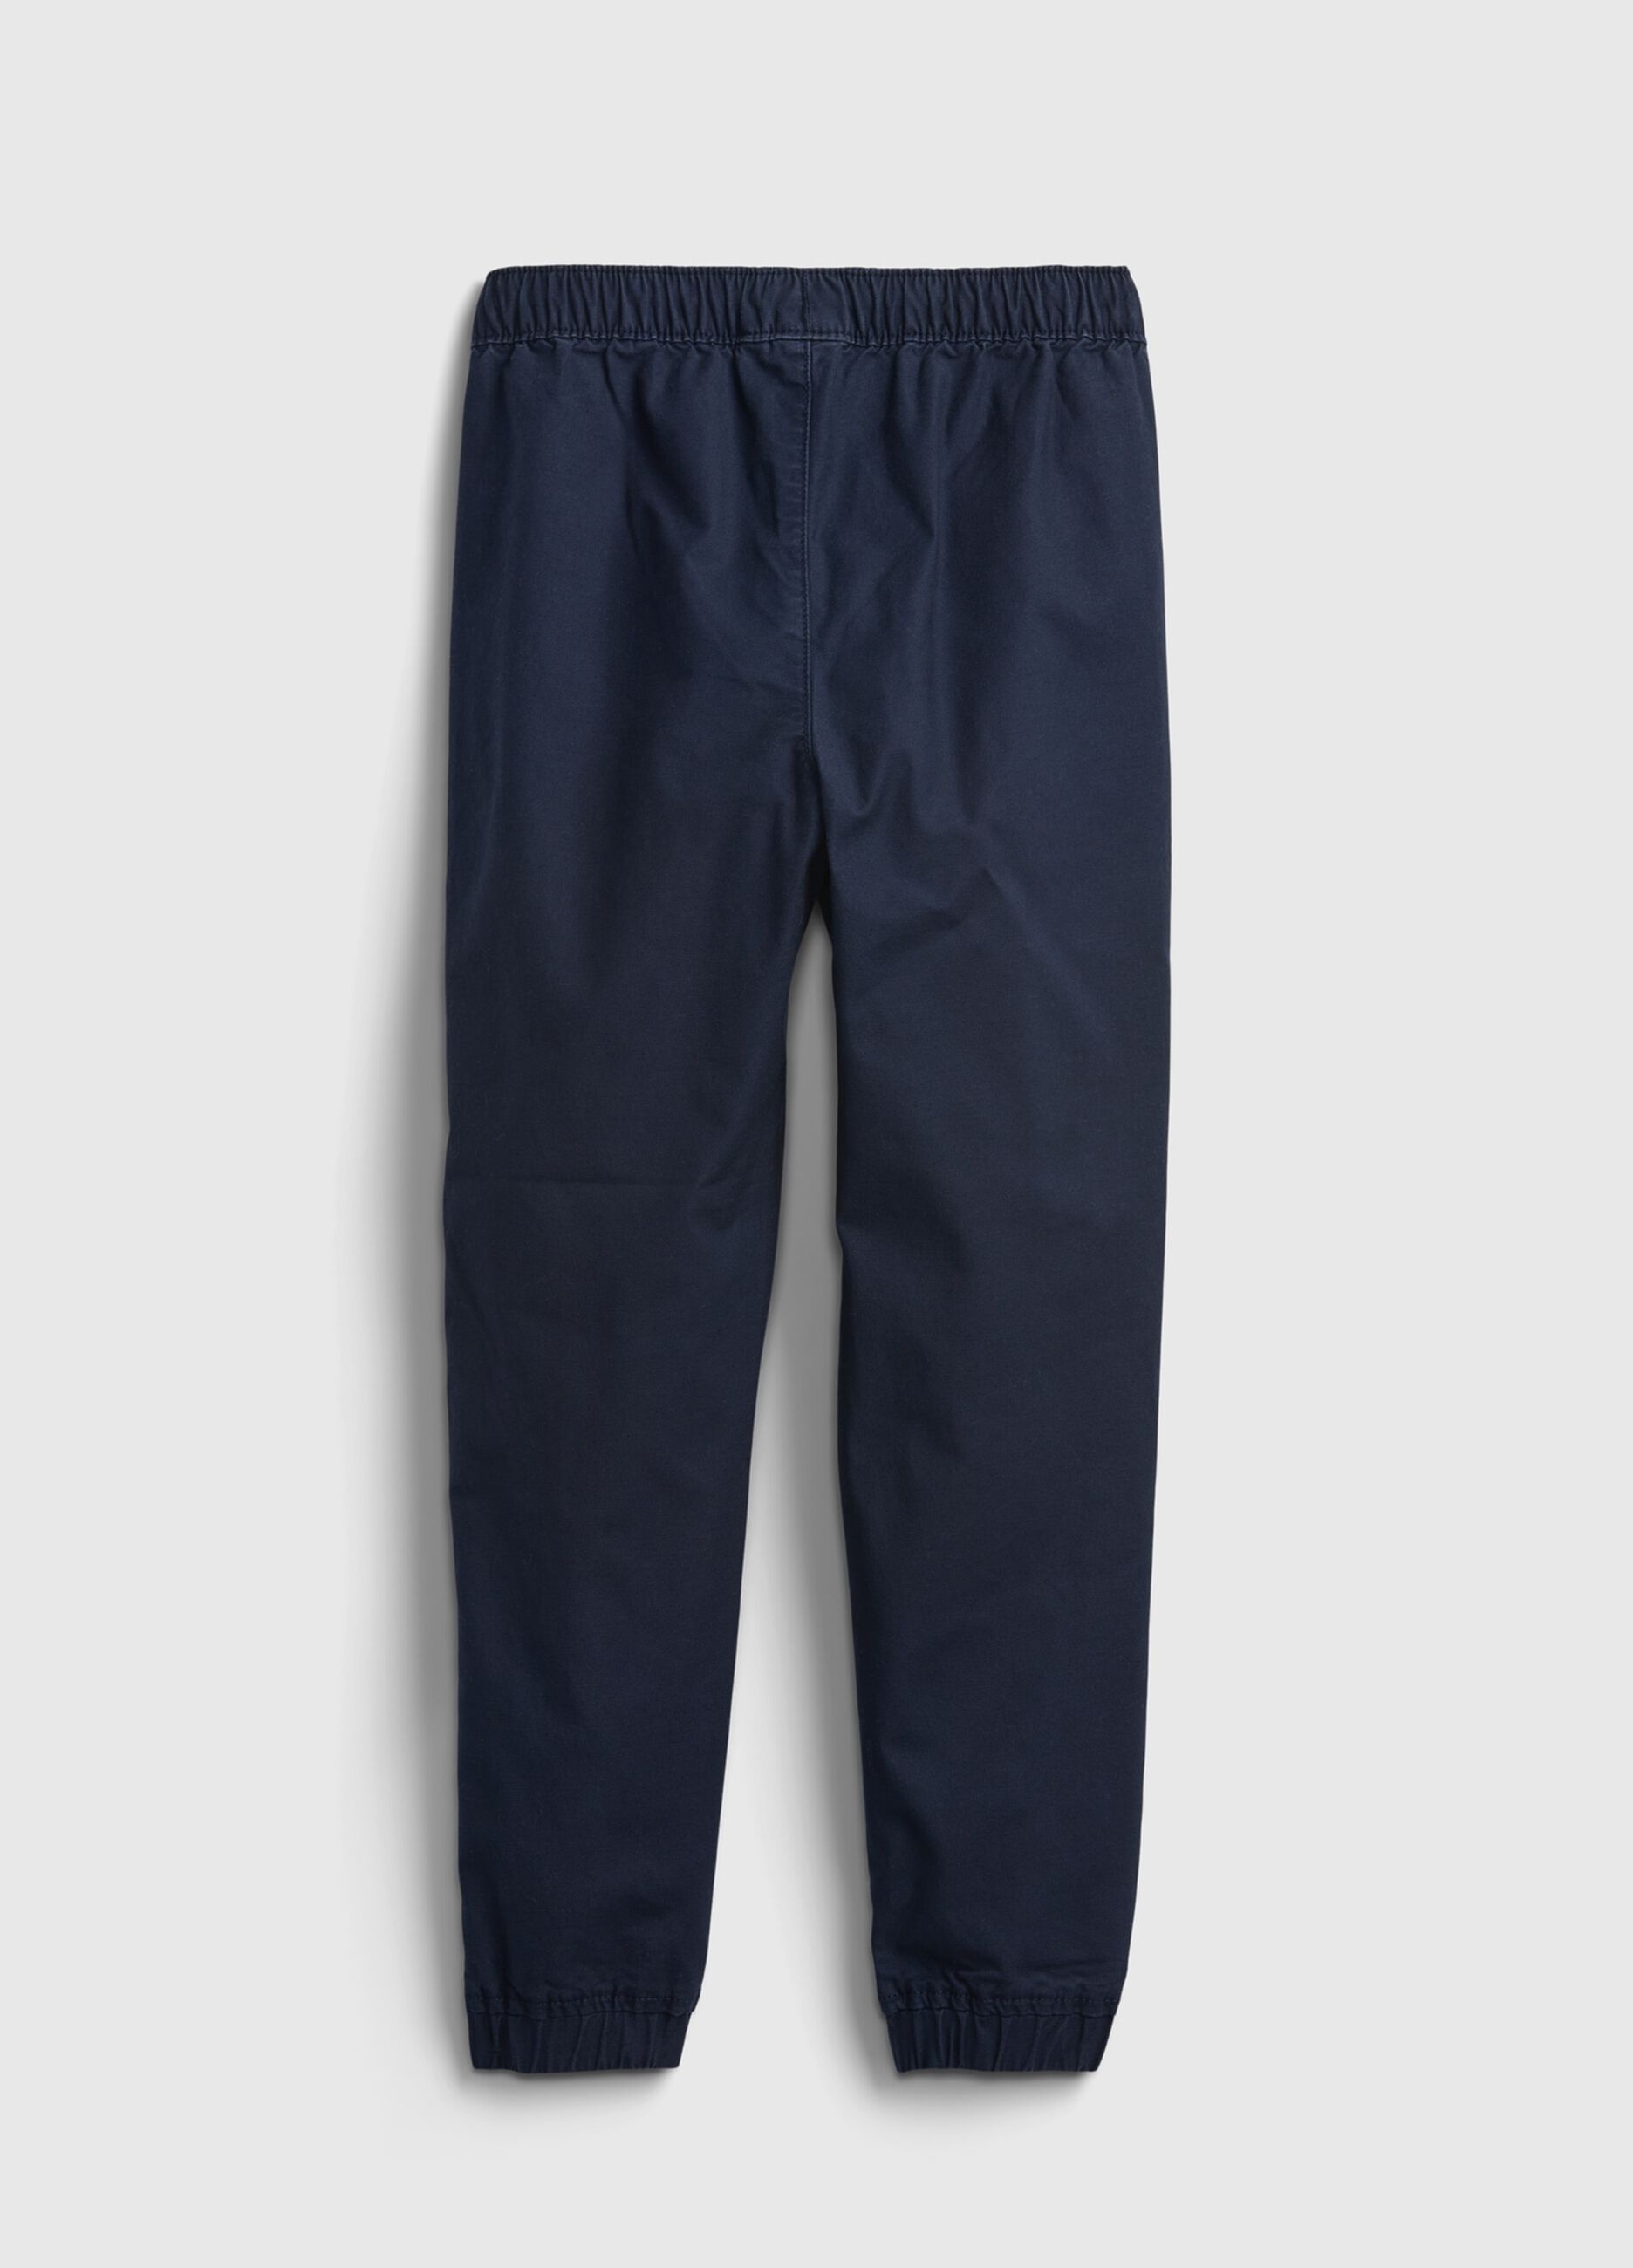 Stretch cotton joggers with drawstring